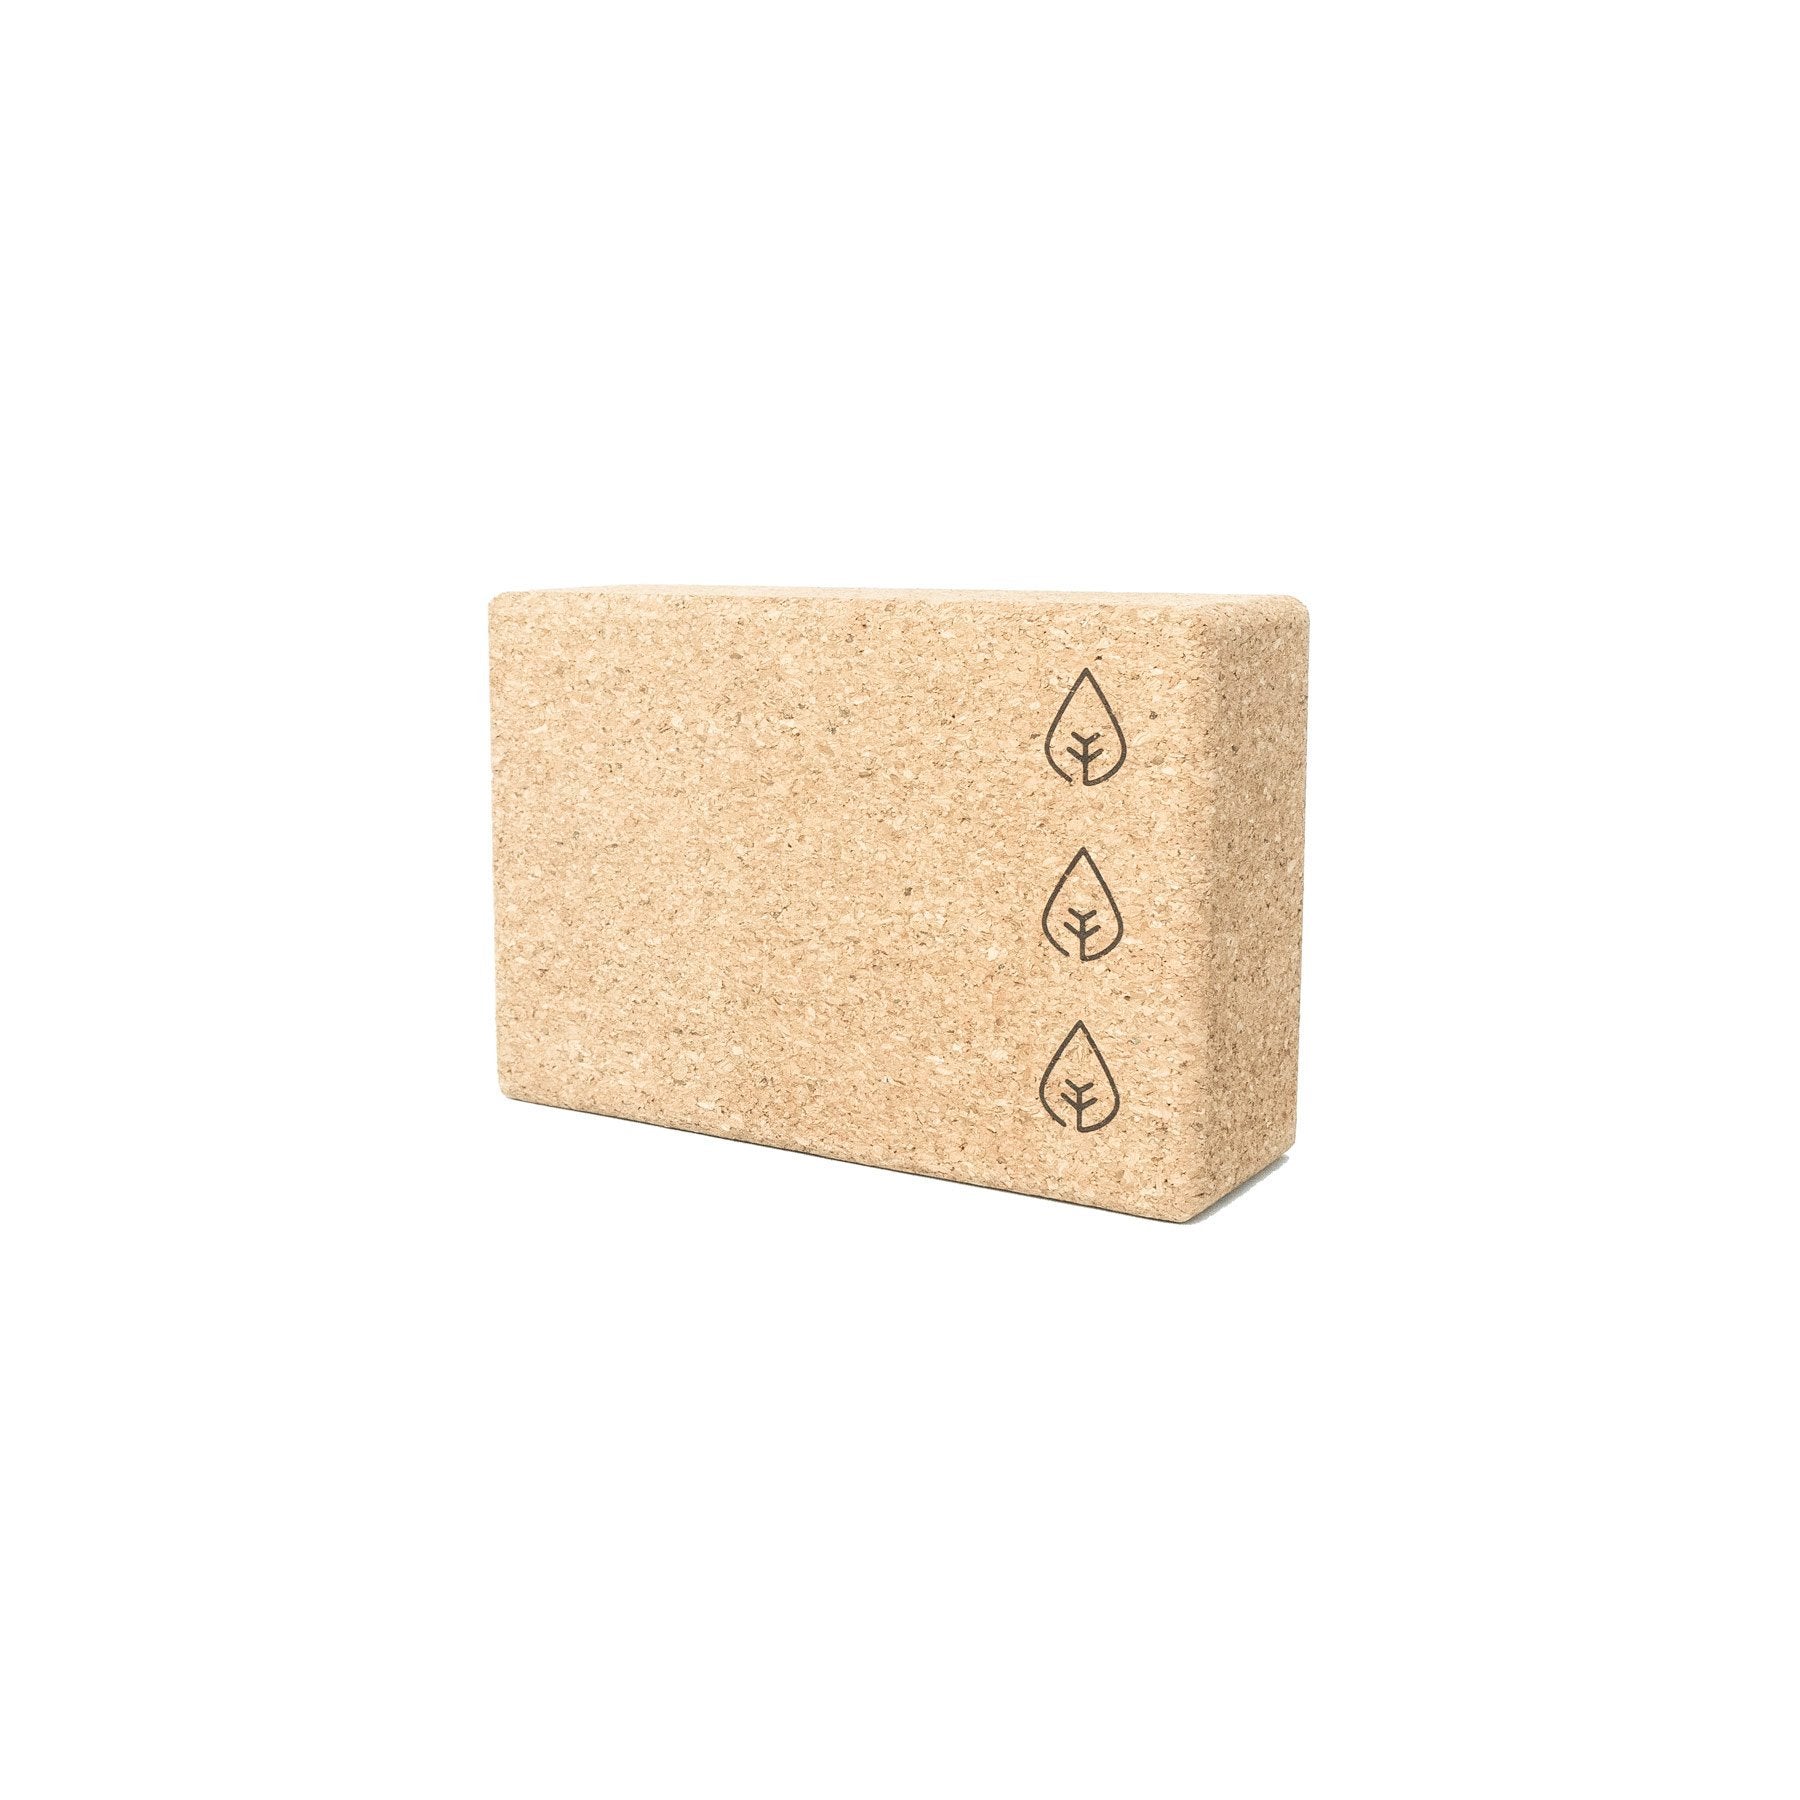 Cork Yoga Blocks - Sustainable and durable material eco-friendly yogis –  The Asanas®